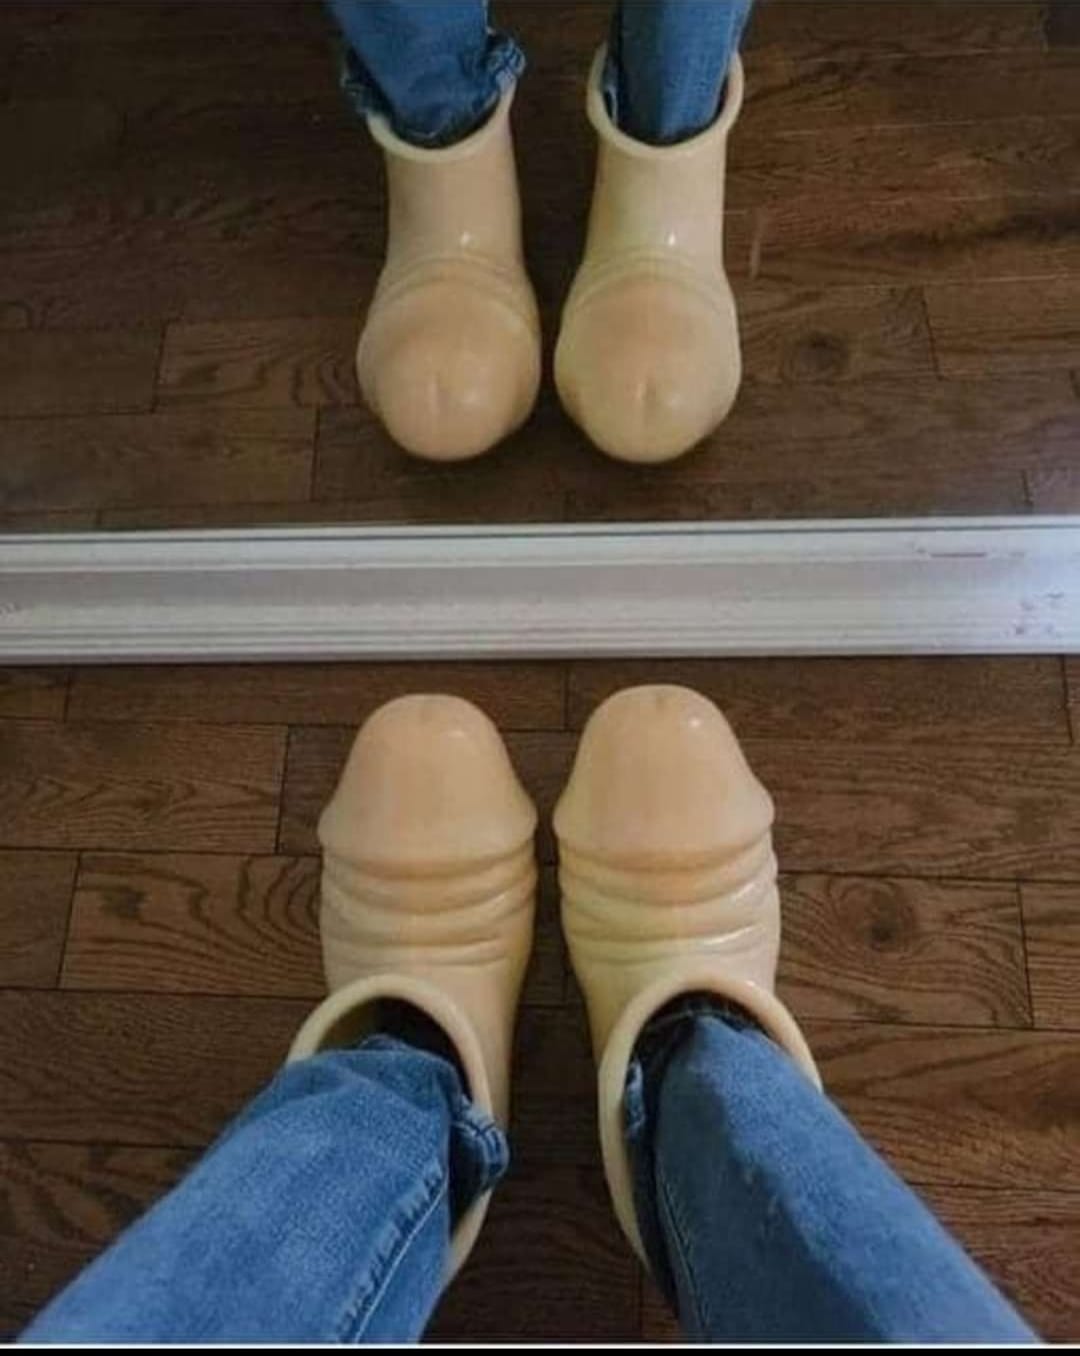 Cute penis boots